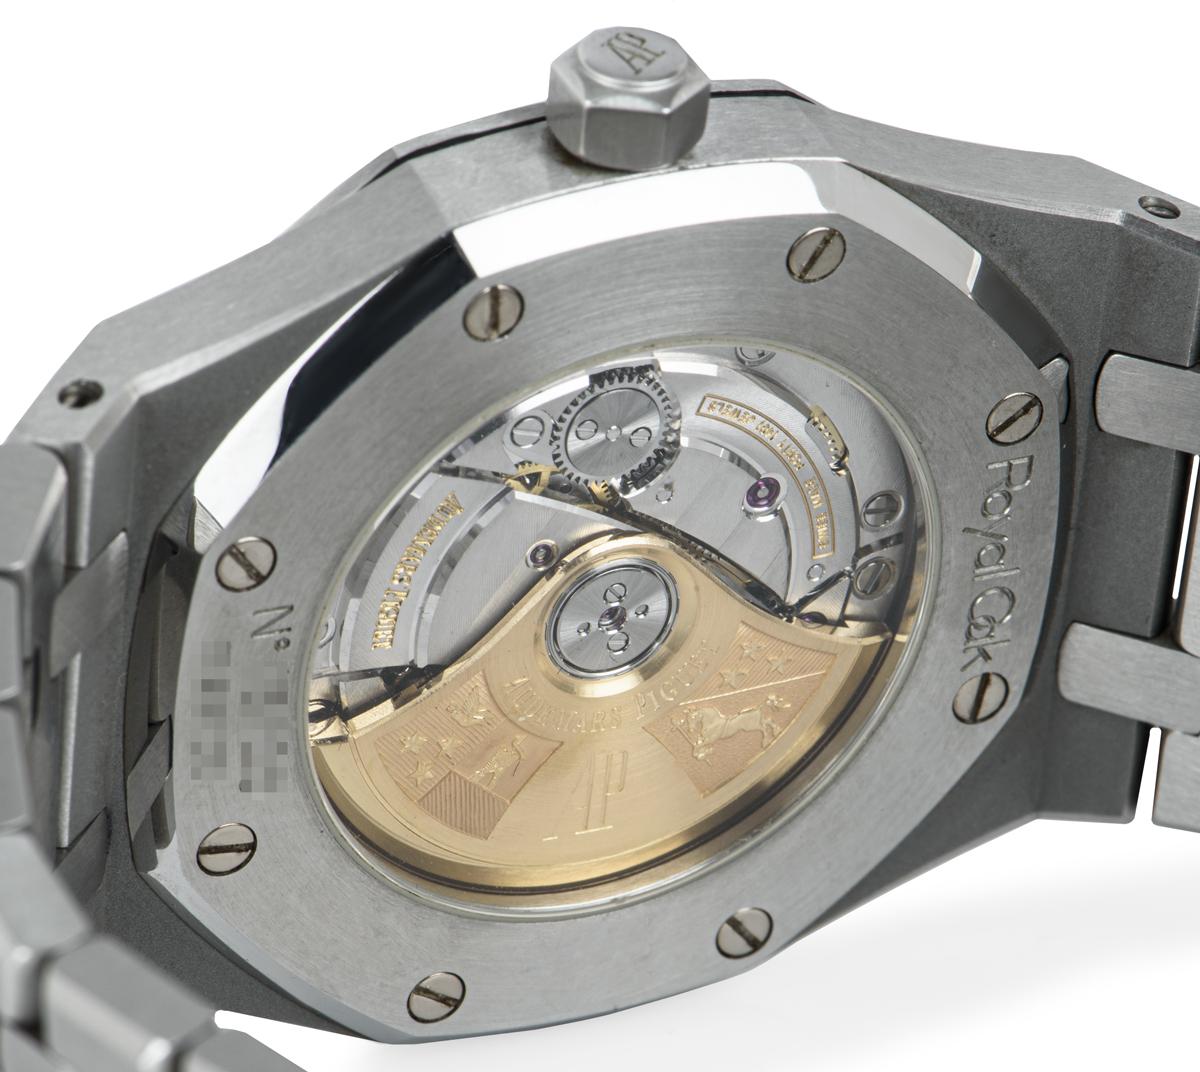 Audemars Piguet Royal Oak 15300ST.OO.1220ST.03 In Excellent Condition For Sale In London, GB